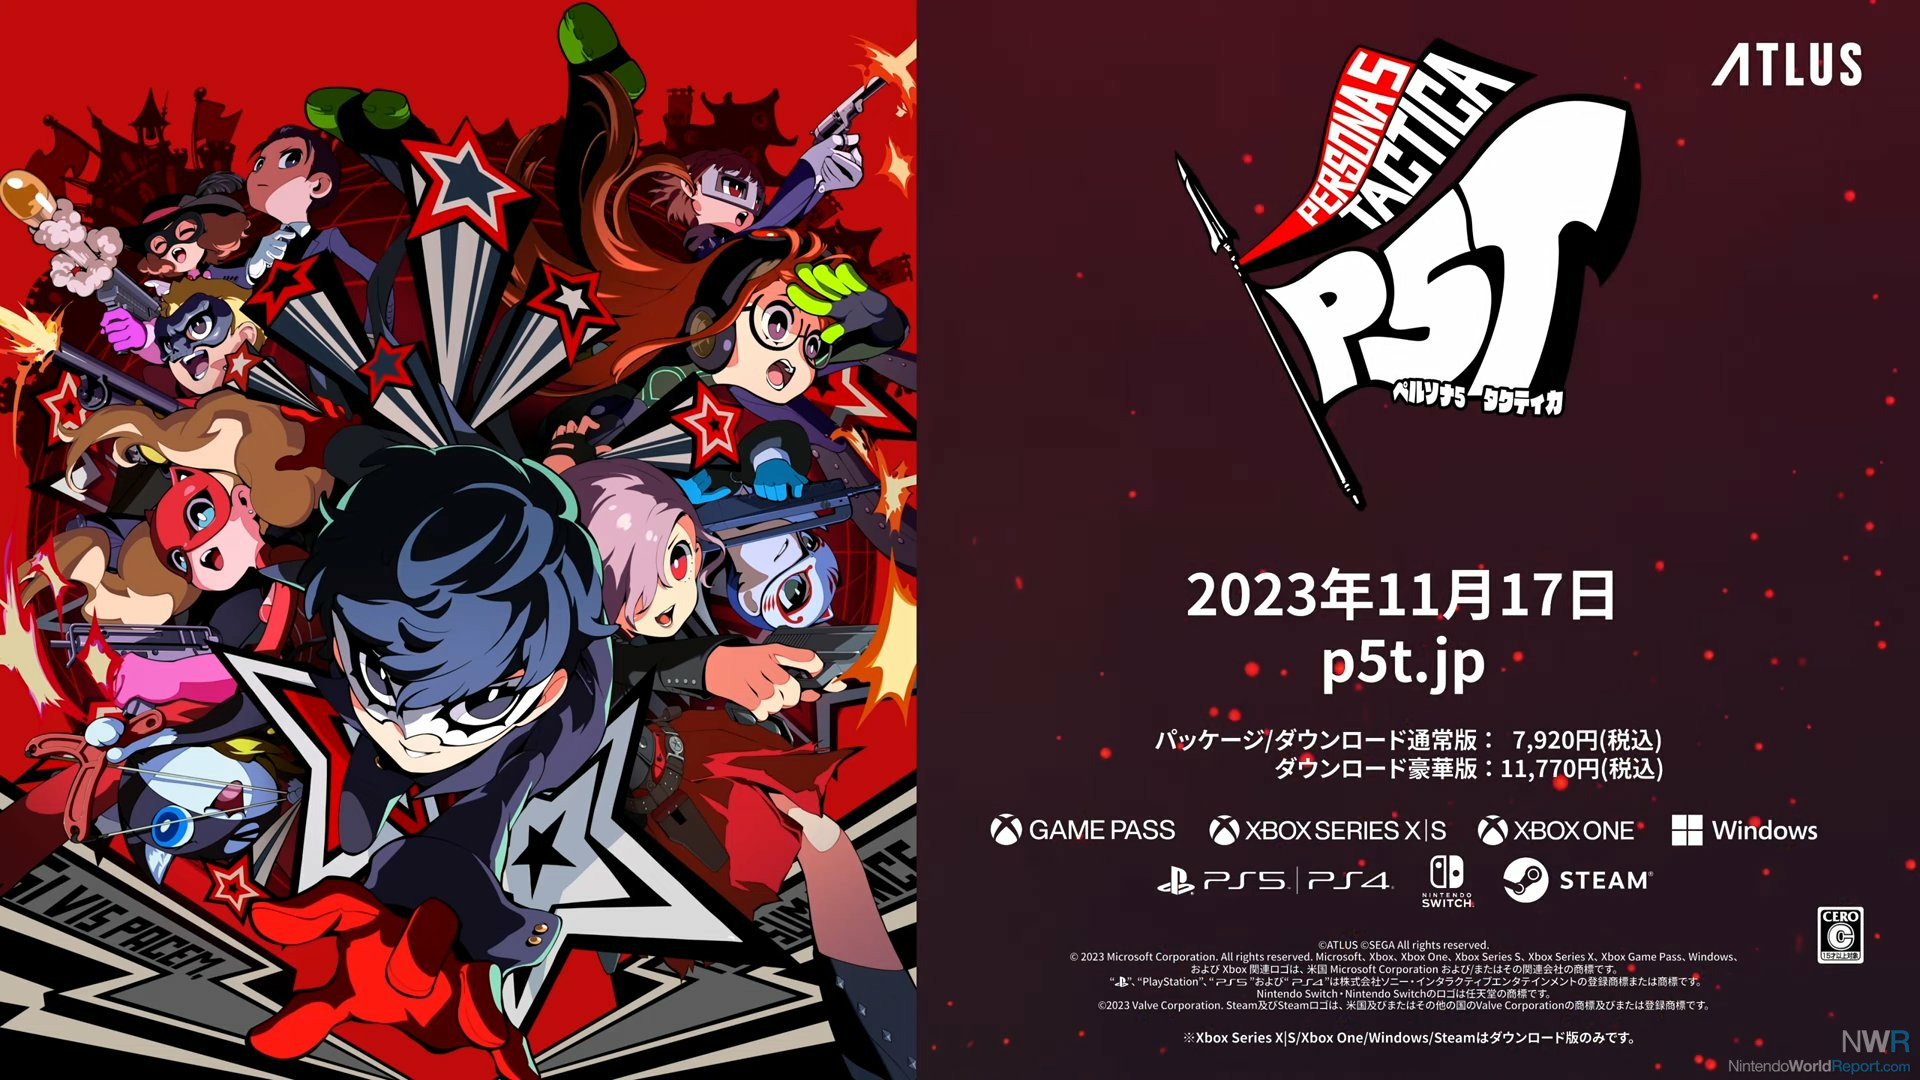 Persona 5 Tactica Confirmed For Switch, Persona 3 Reload Not Confirmed ...